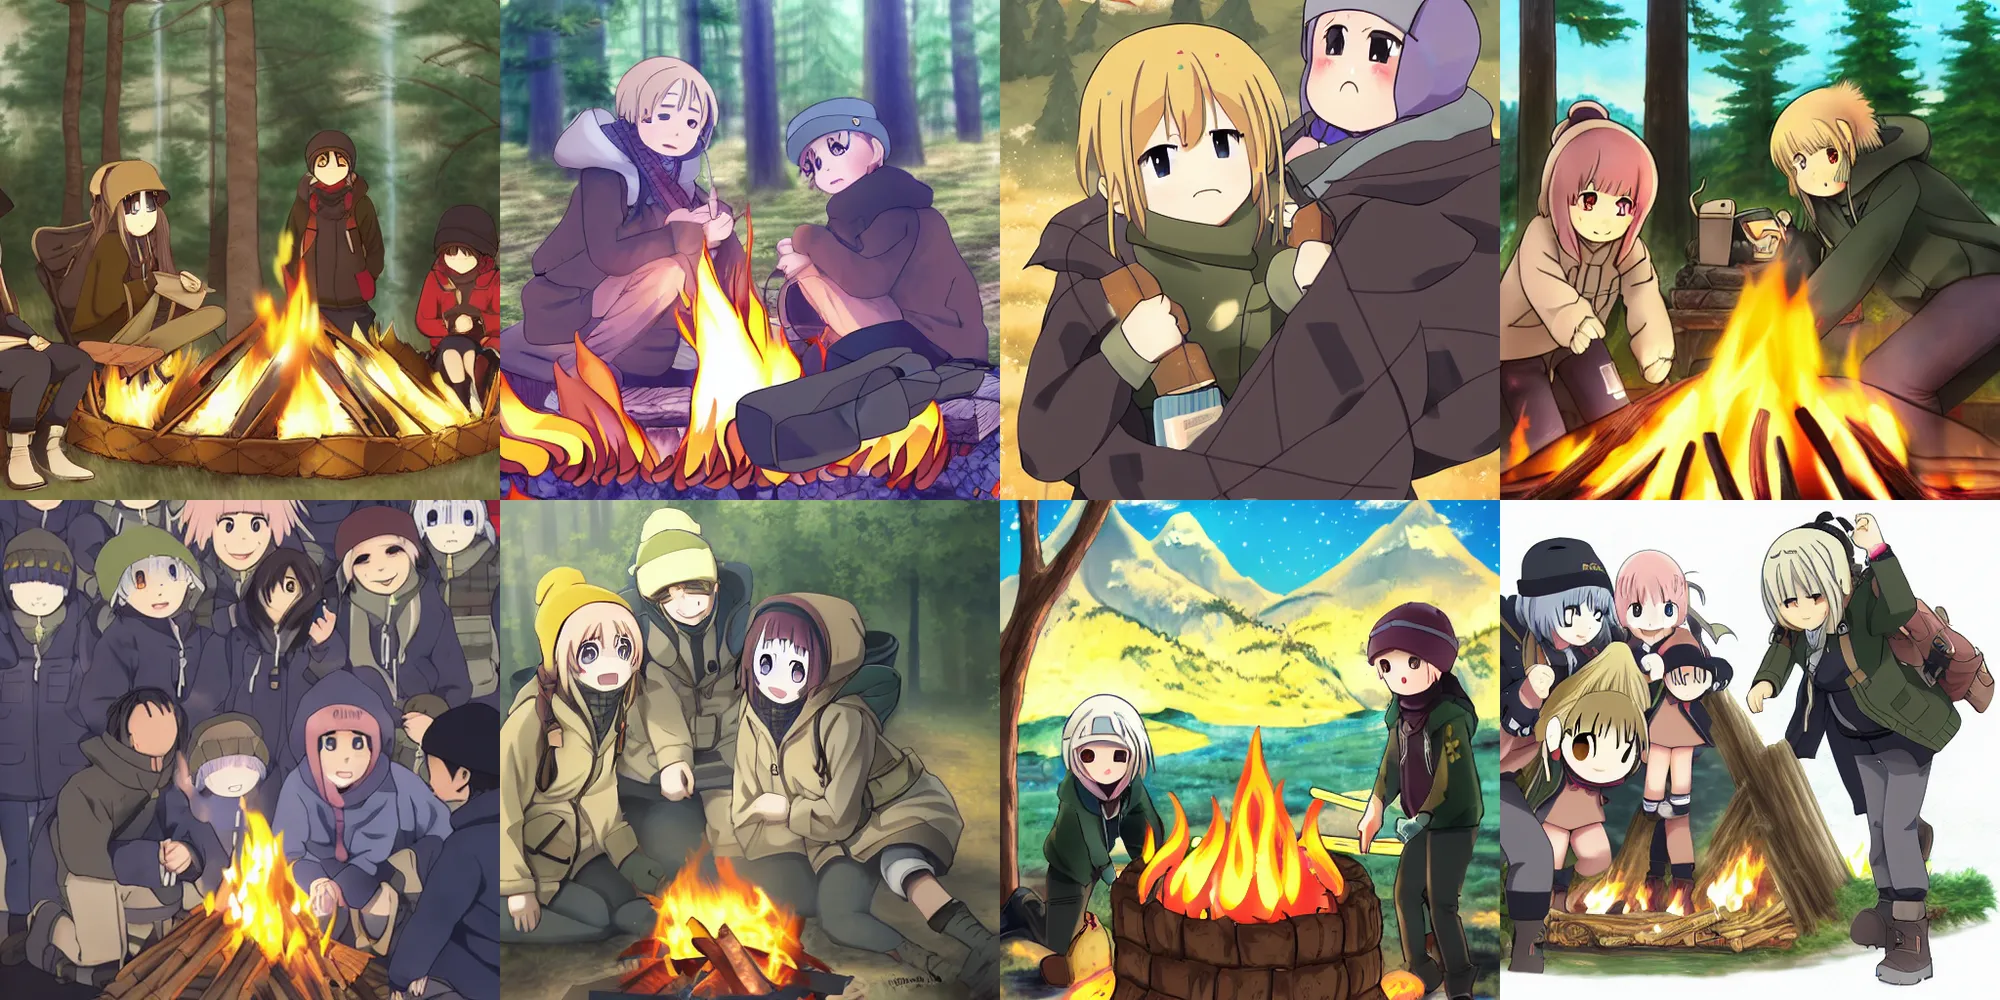 Delicious in Dungeon Anime: Will it be similar to Campfire Cooking in  Another World? - Spiel Anime